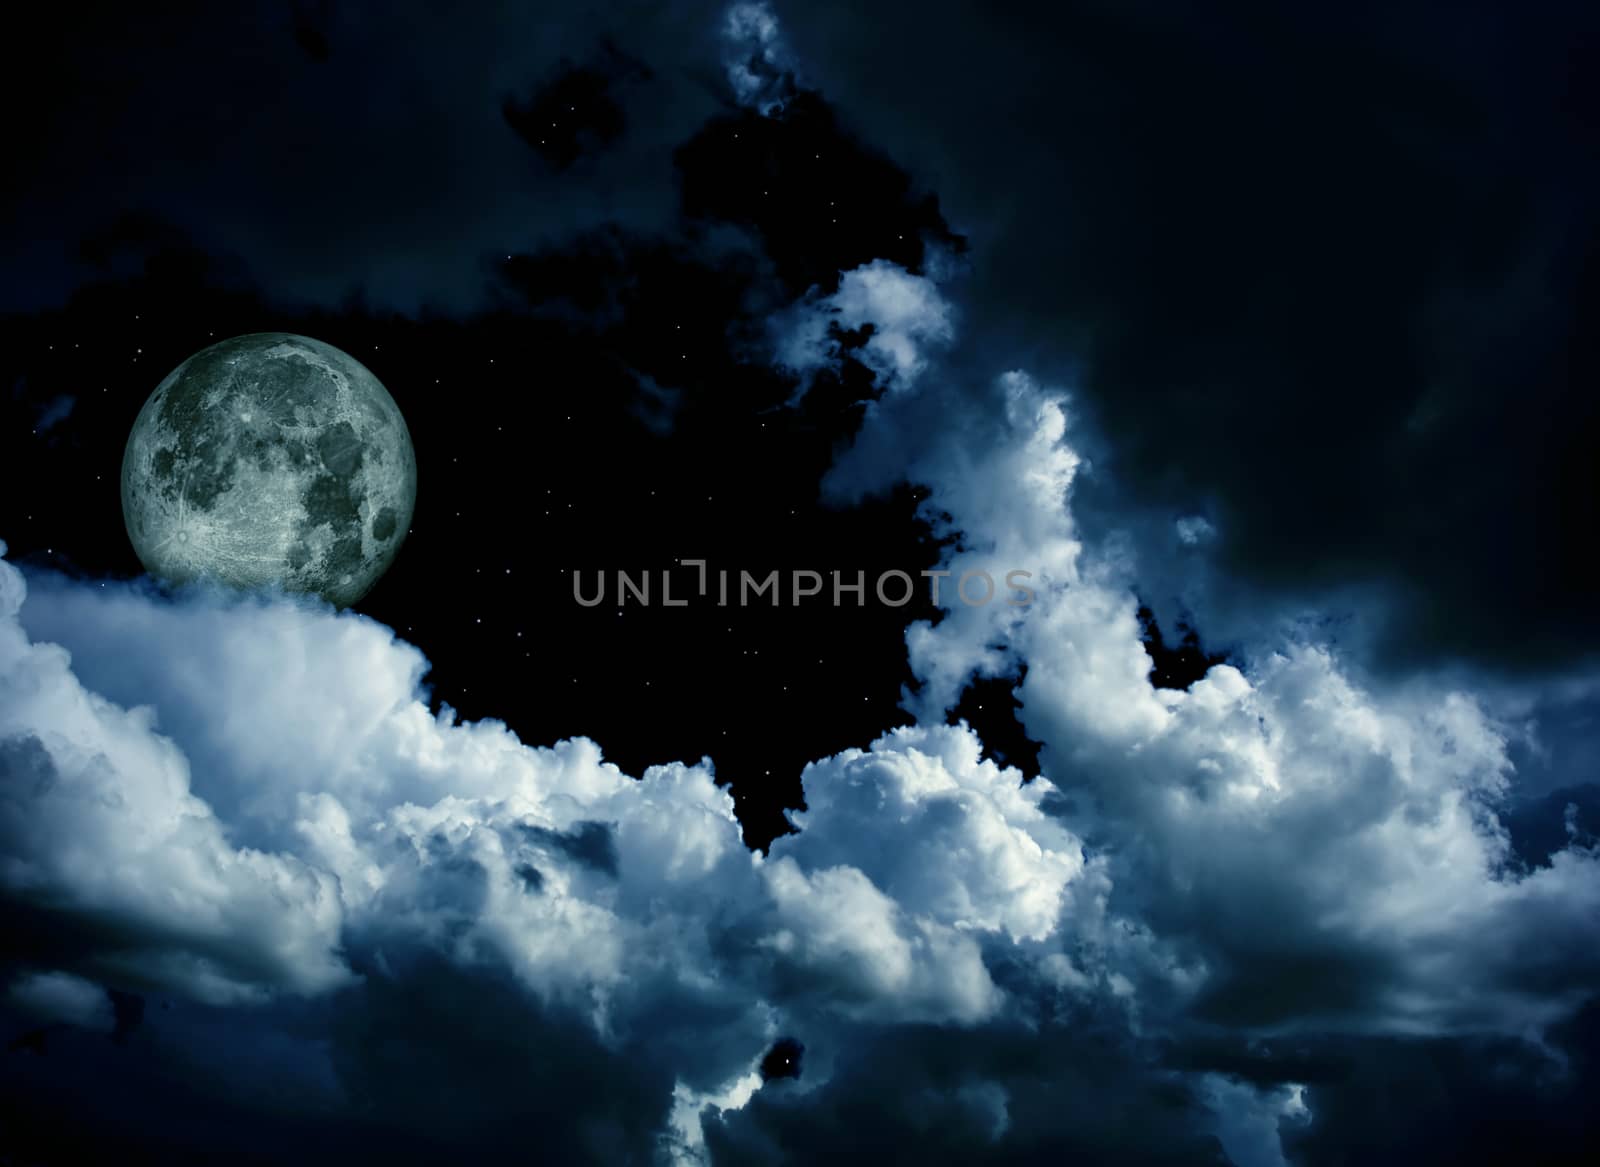 full moon with clouds and stars